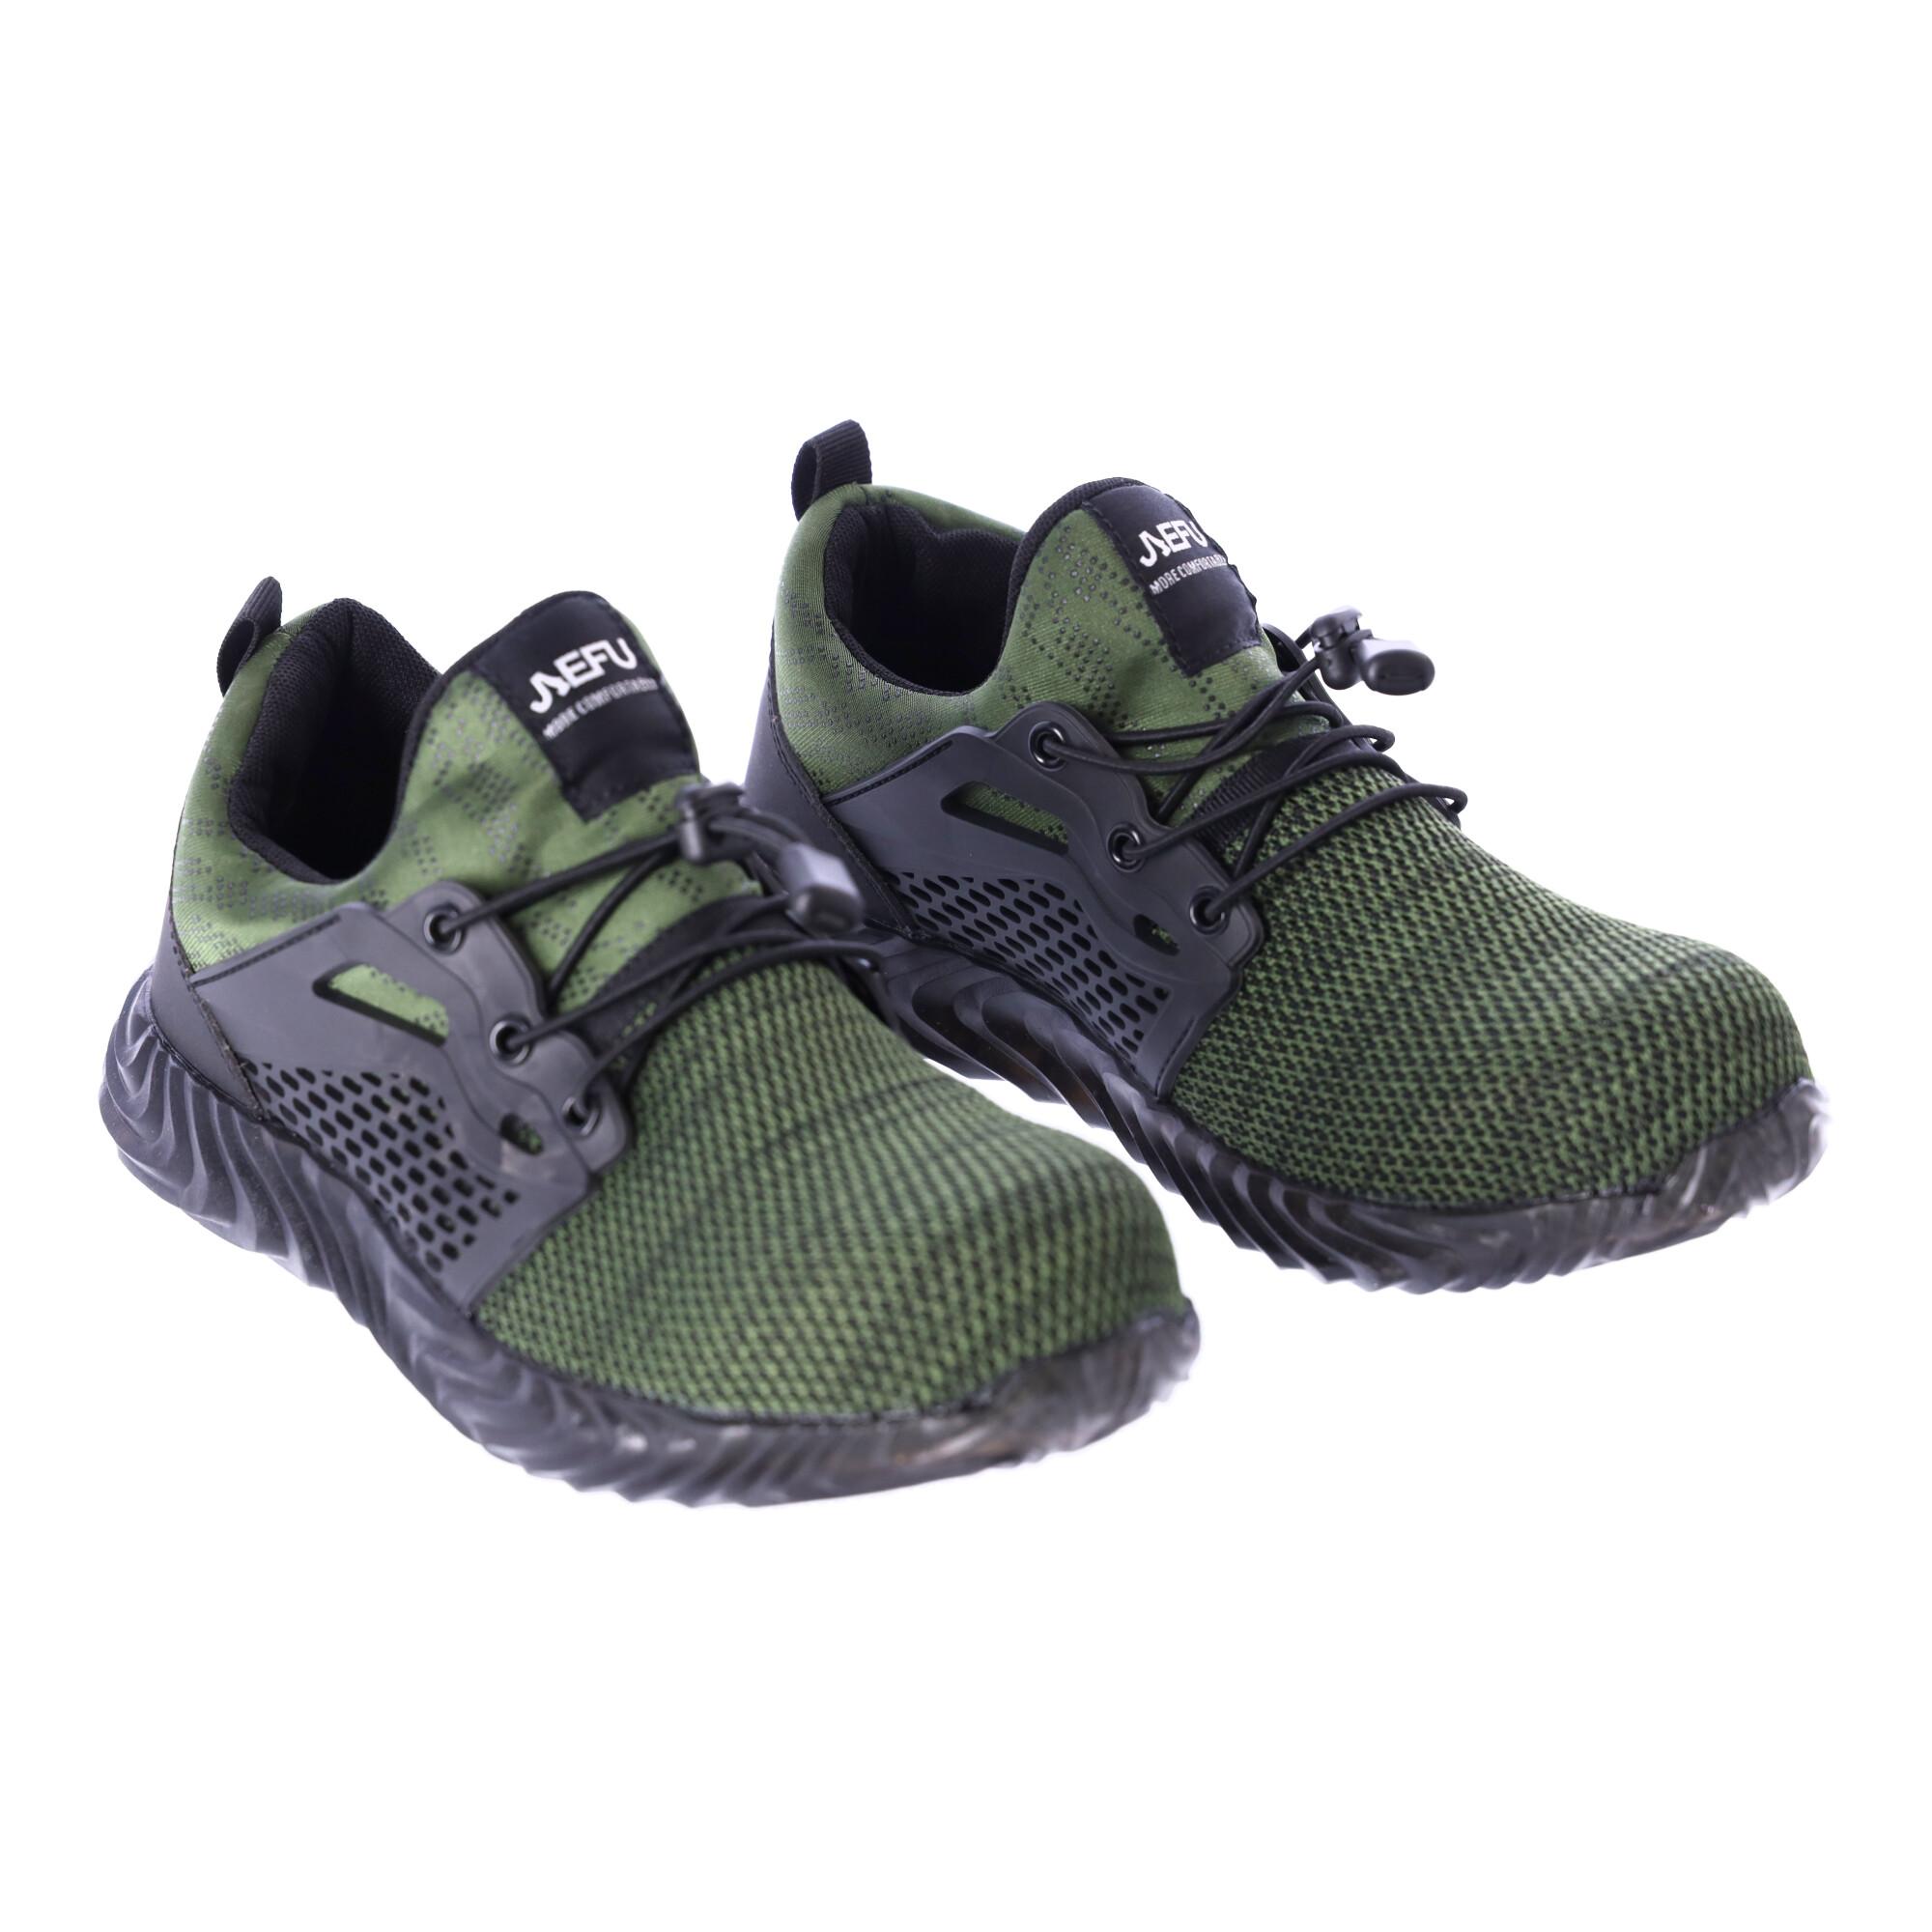 Work safety shoes "41" - green